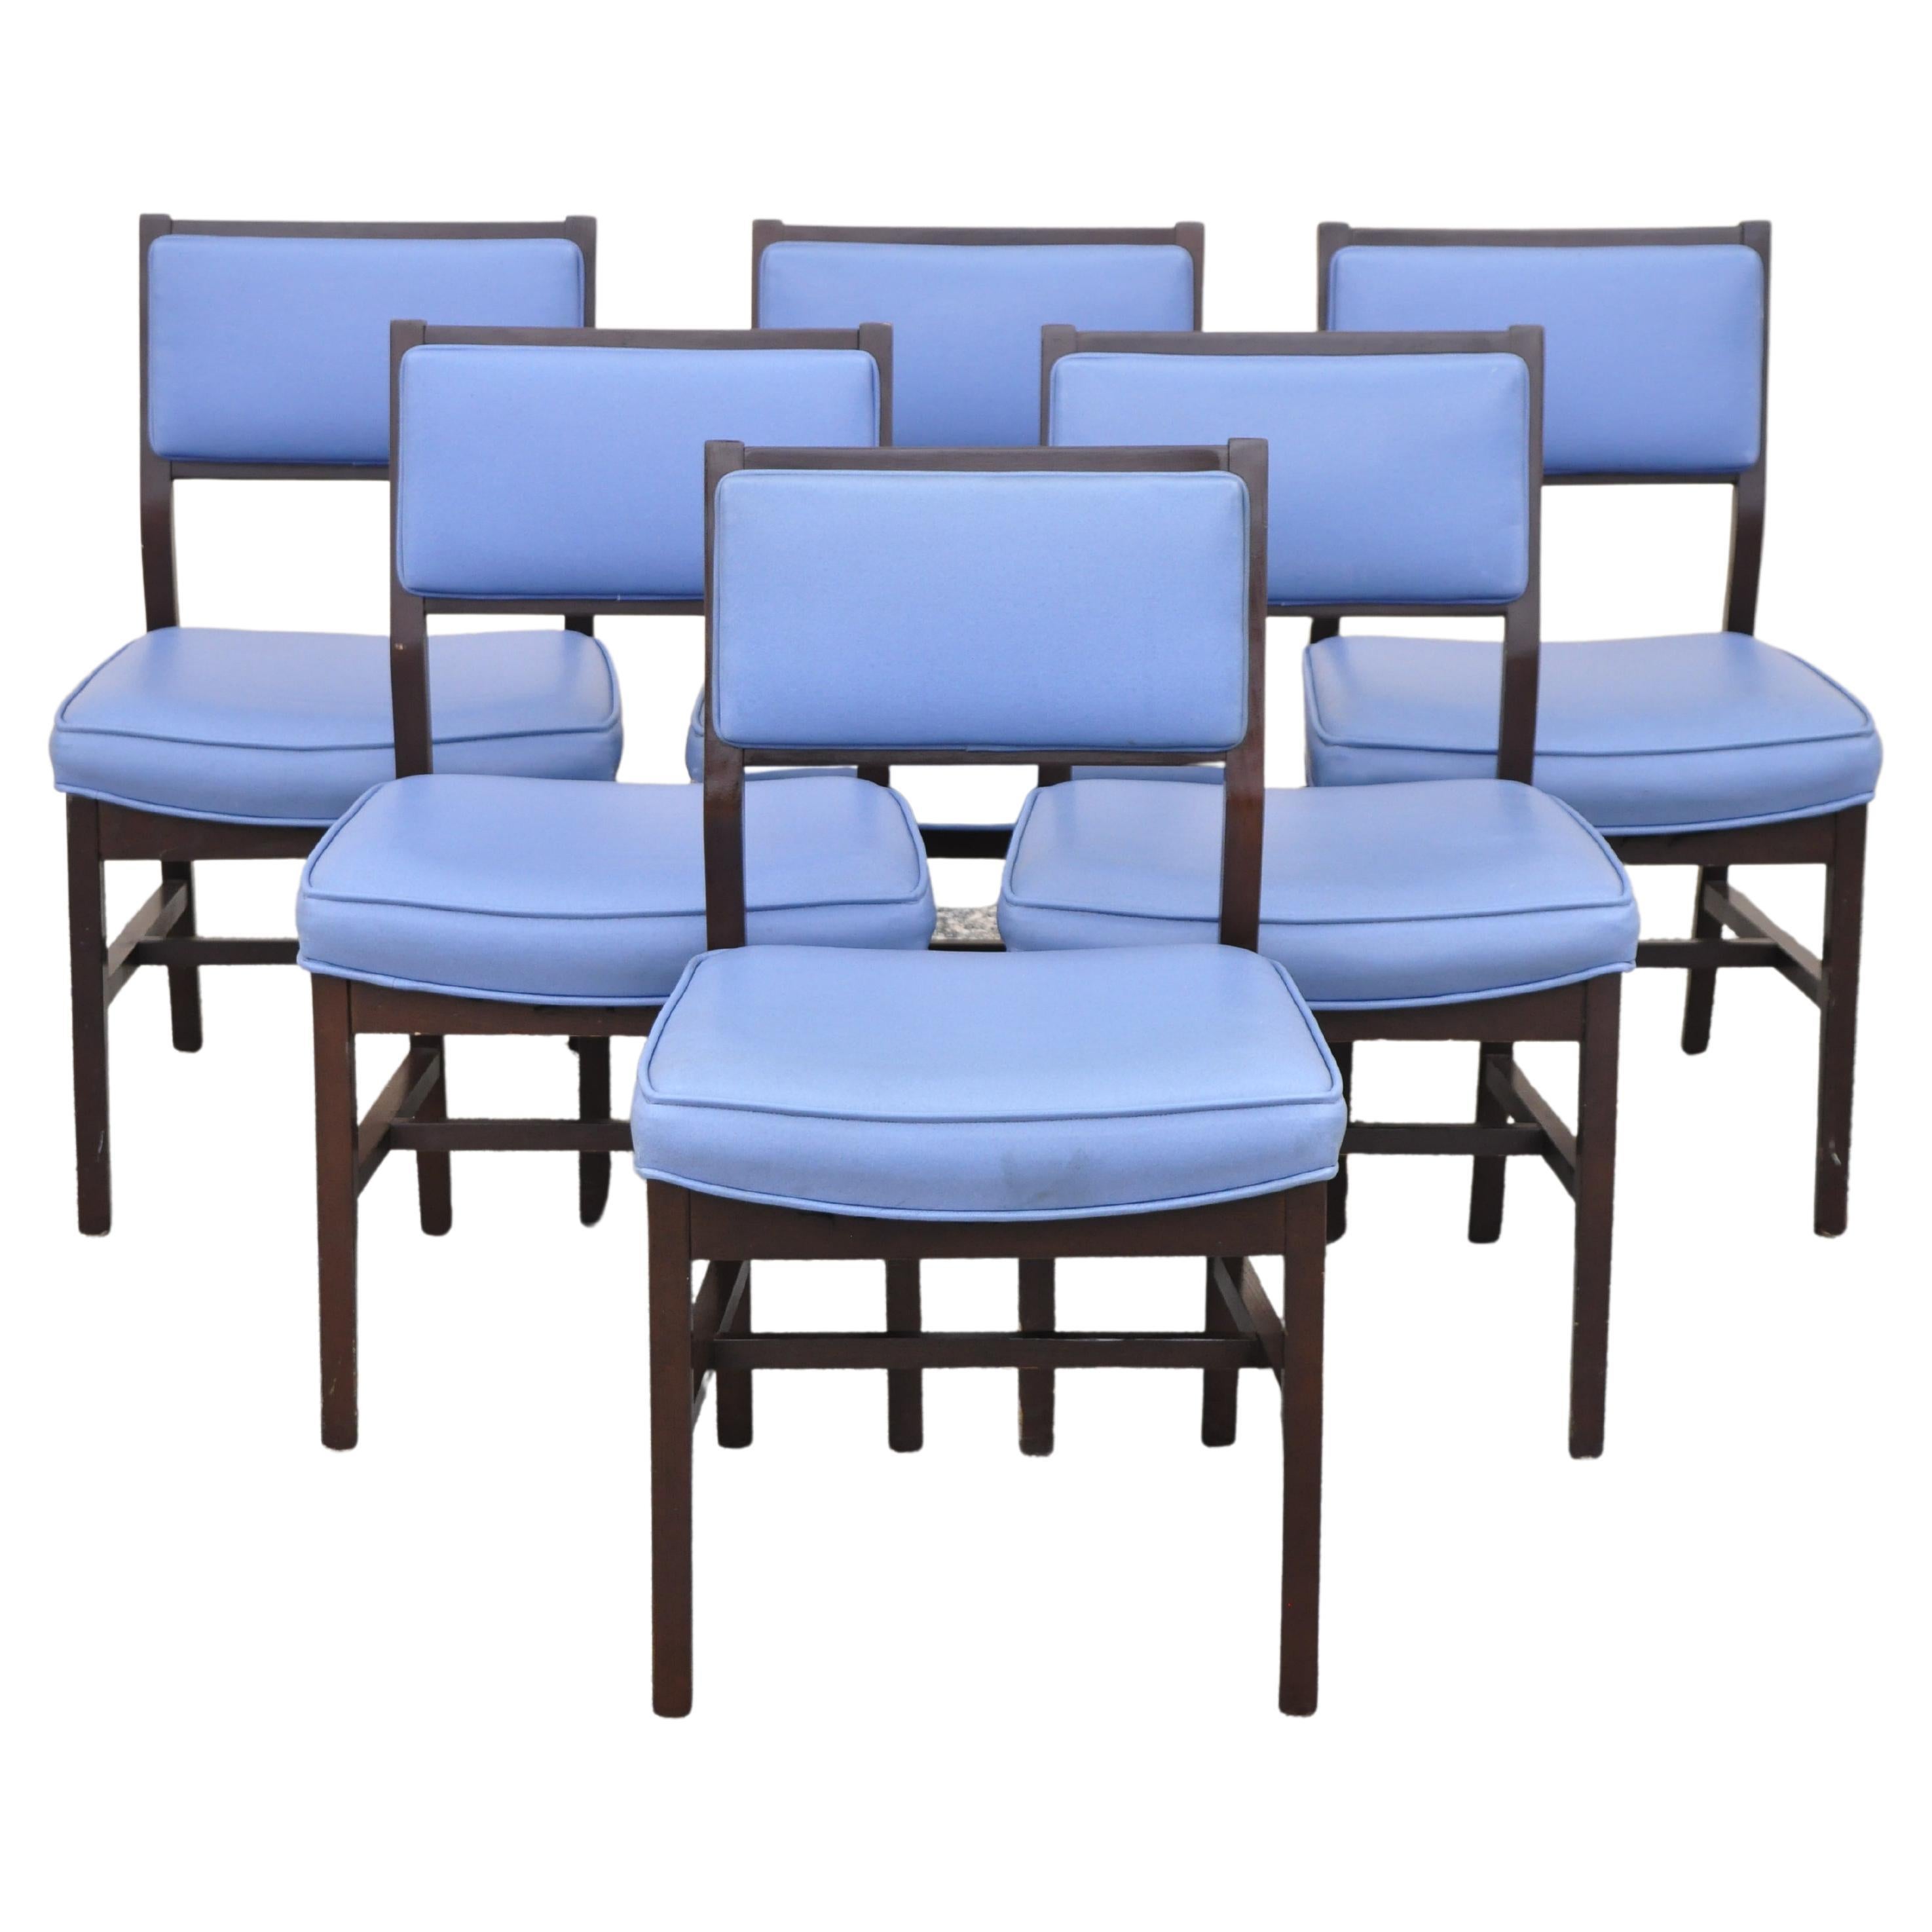 Vintage Mid Century Modern Jens Risom Style Blue Sculpted Dining Chair -Set of 6